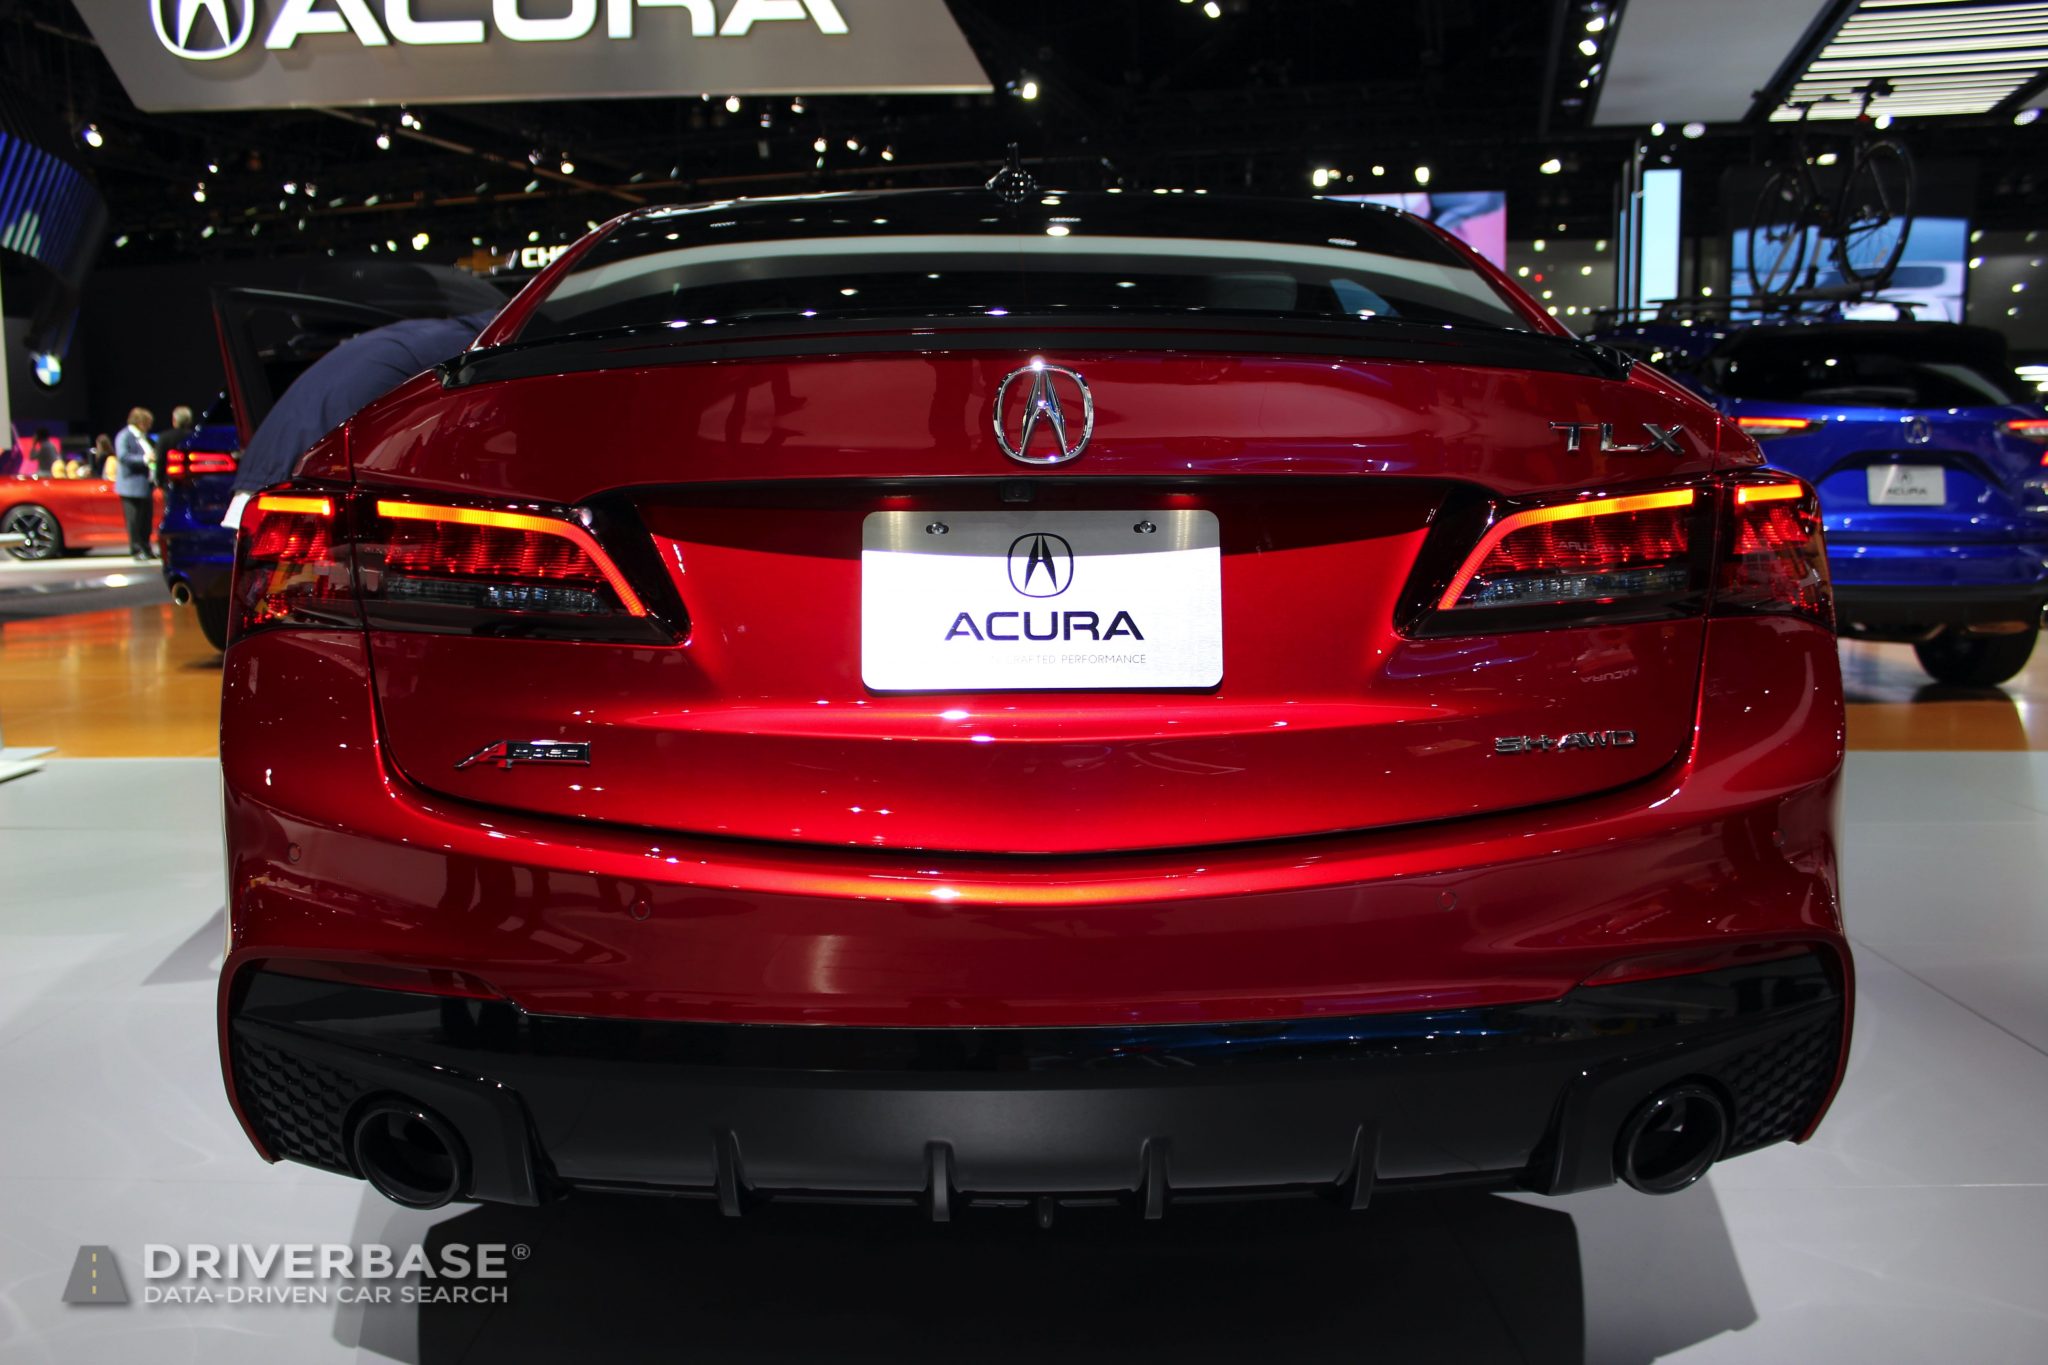 2020 Acura TLX at the 2019 Los Angeles Auto Show